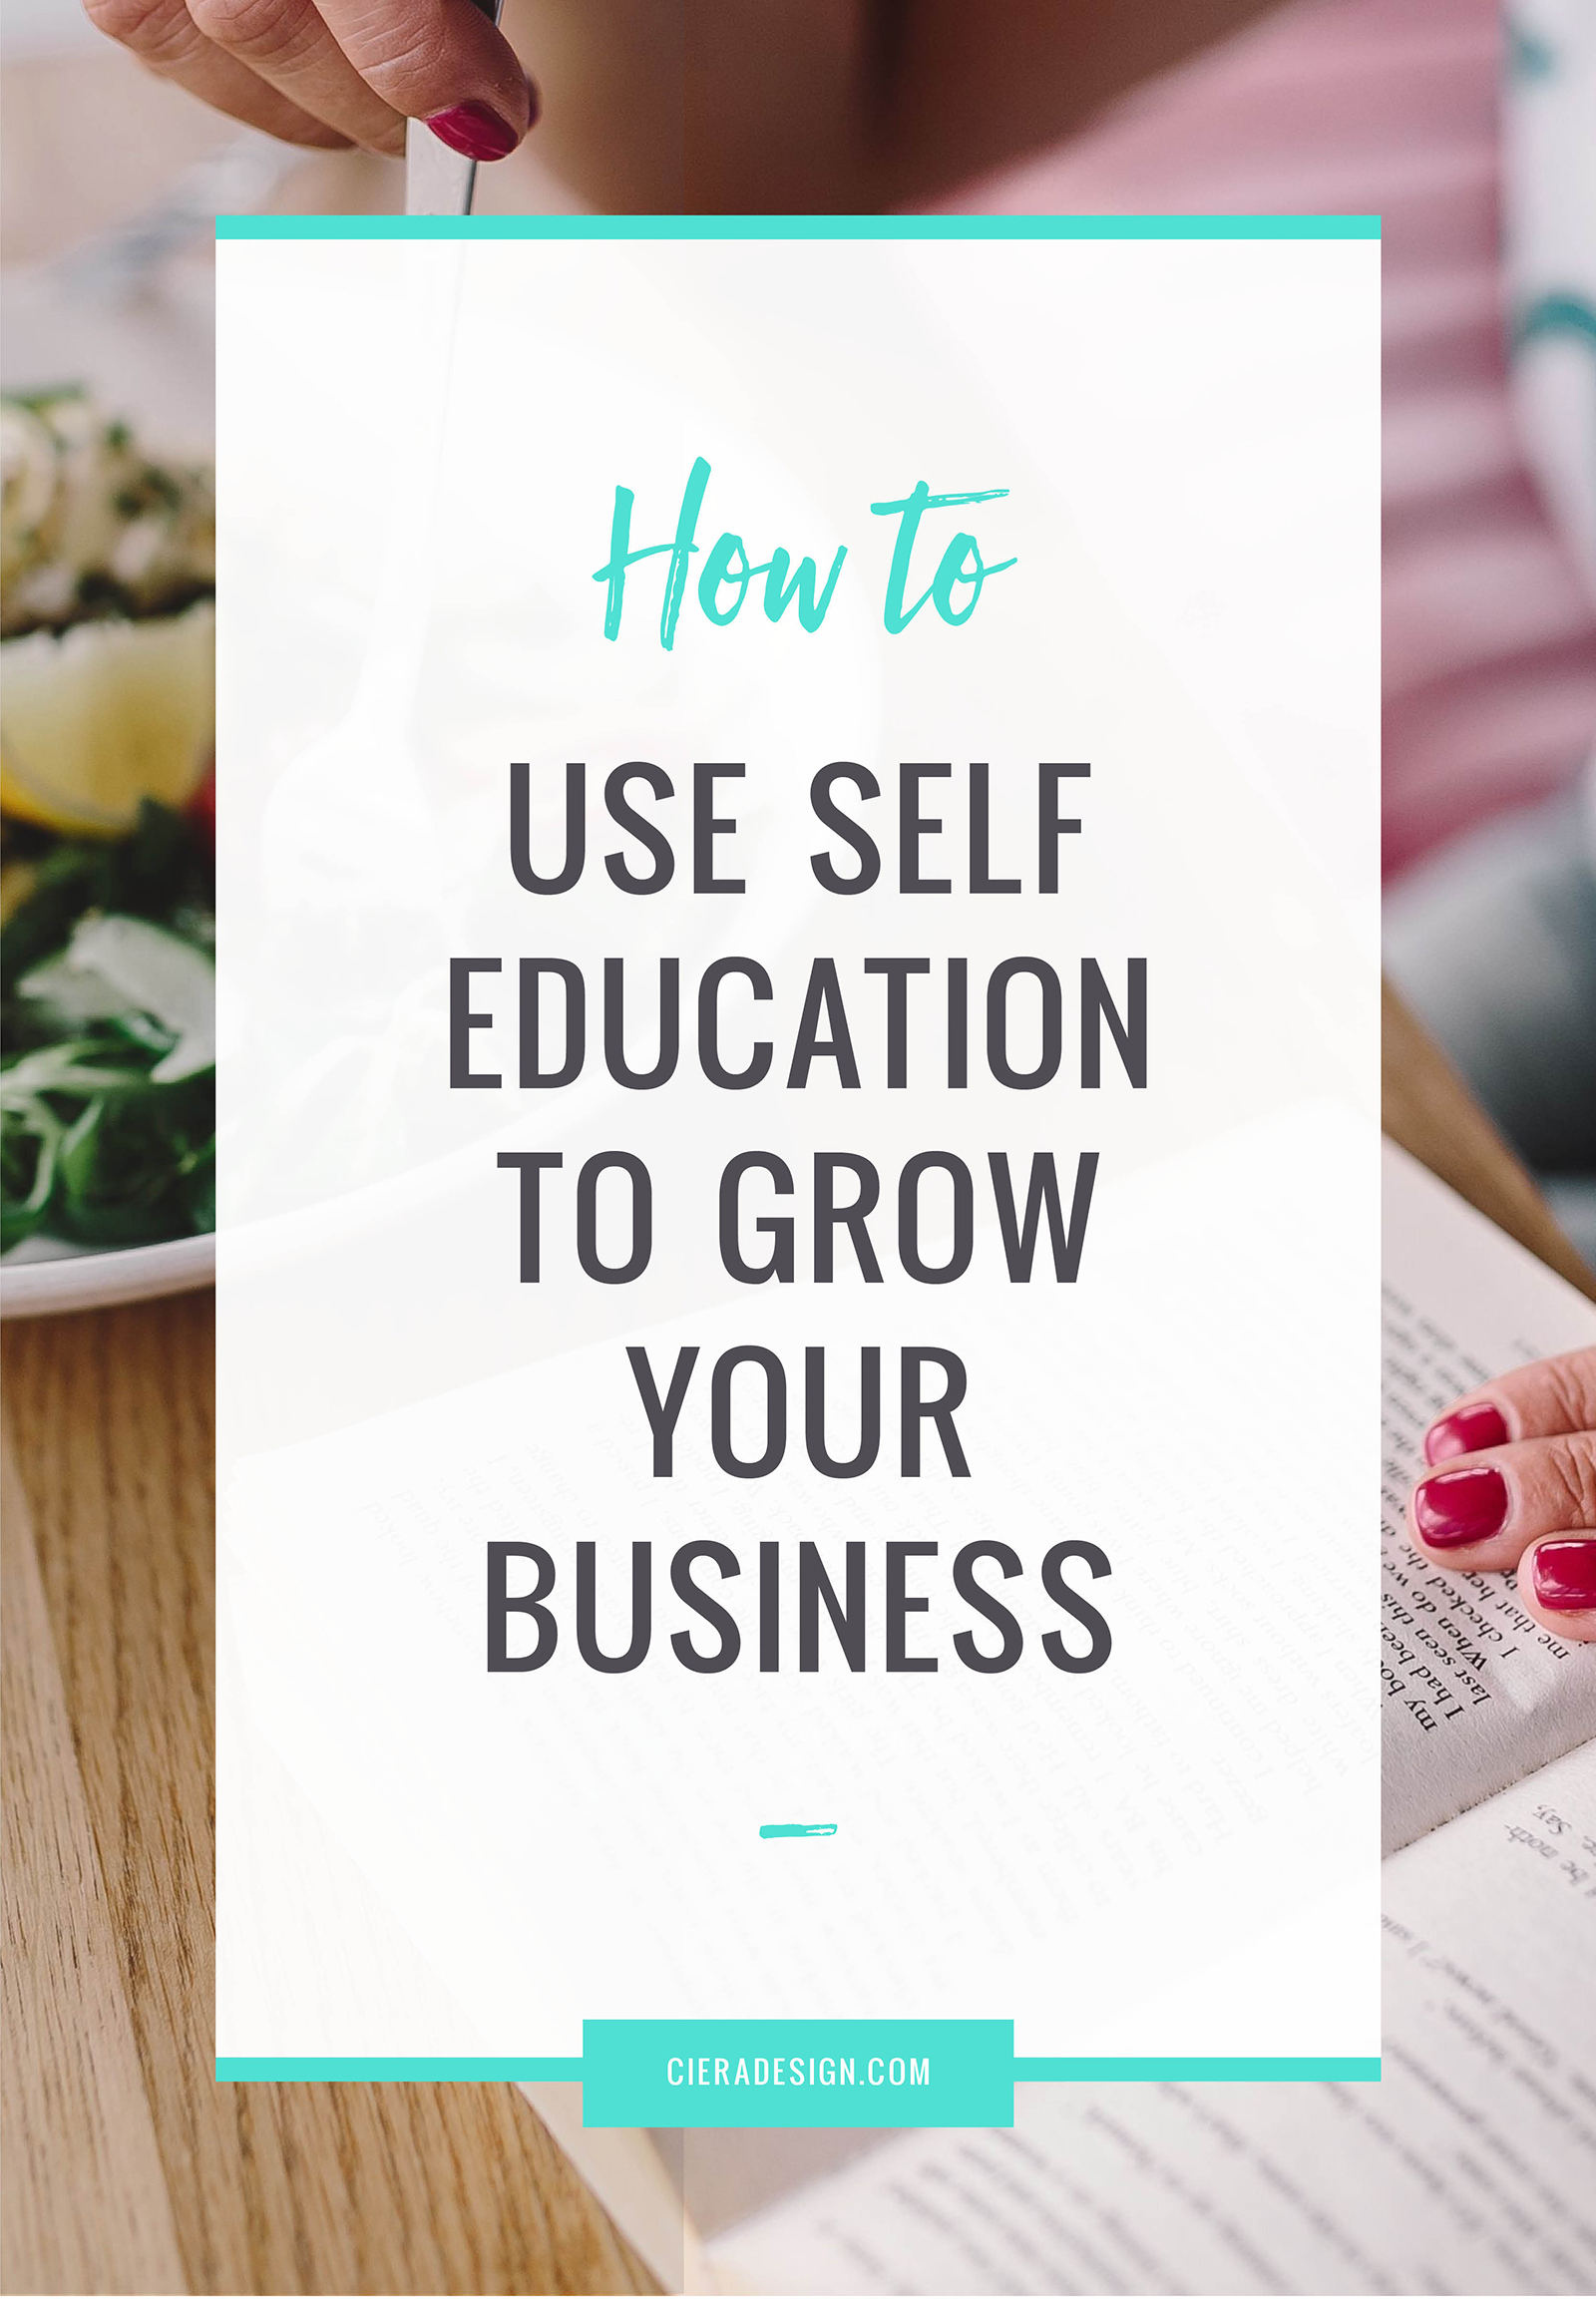 If you are keen on developing yourself in one way or another, either for your benefit or for the business, here are some ways to help.